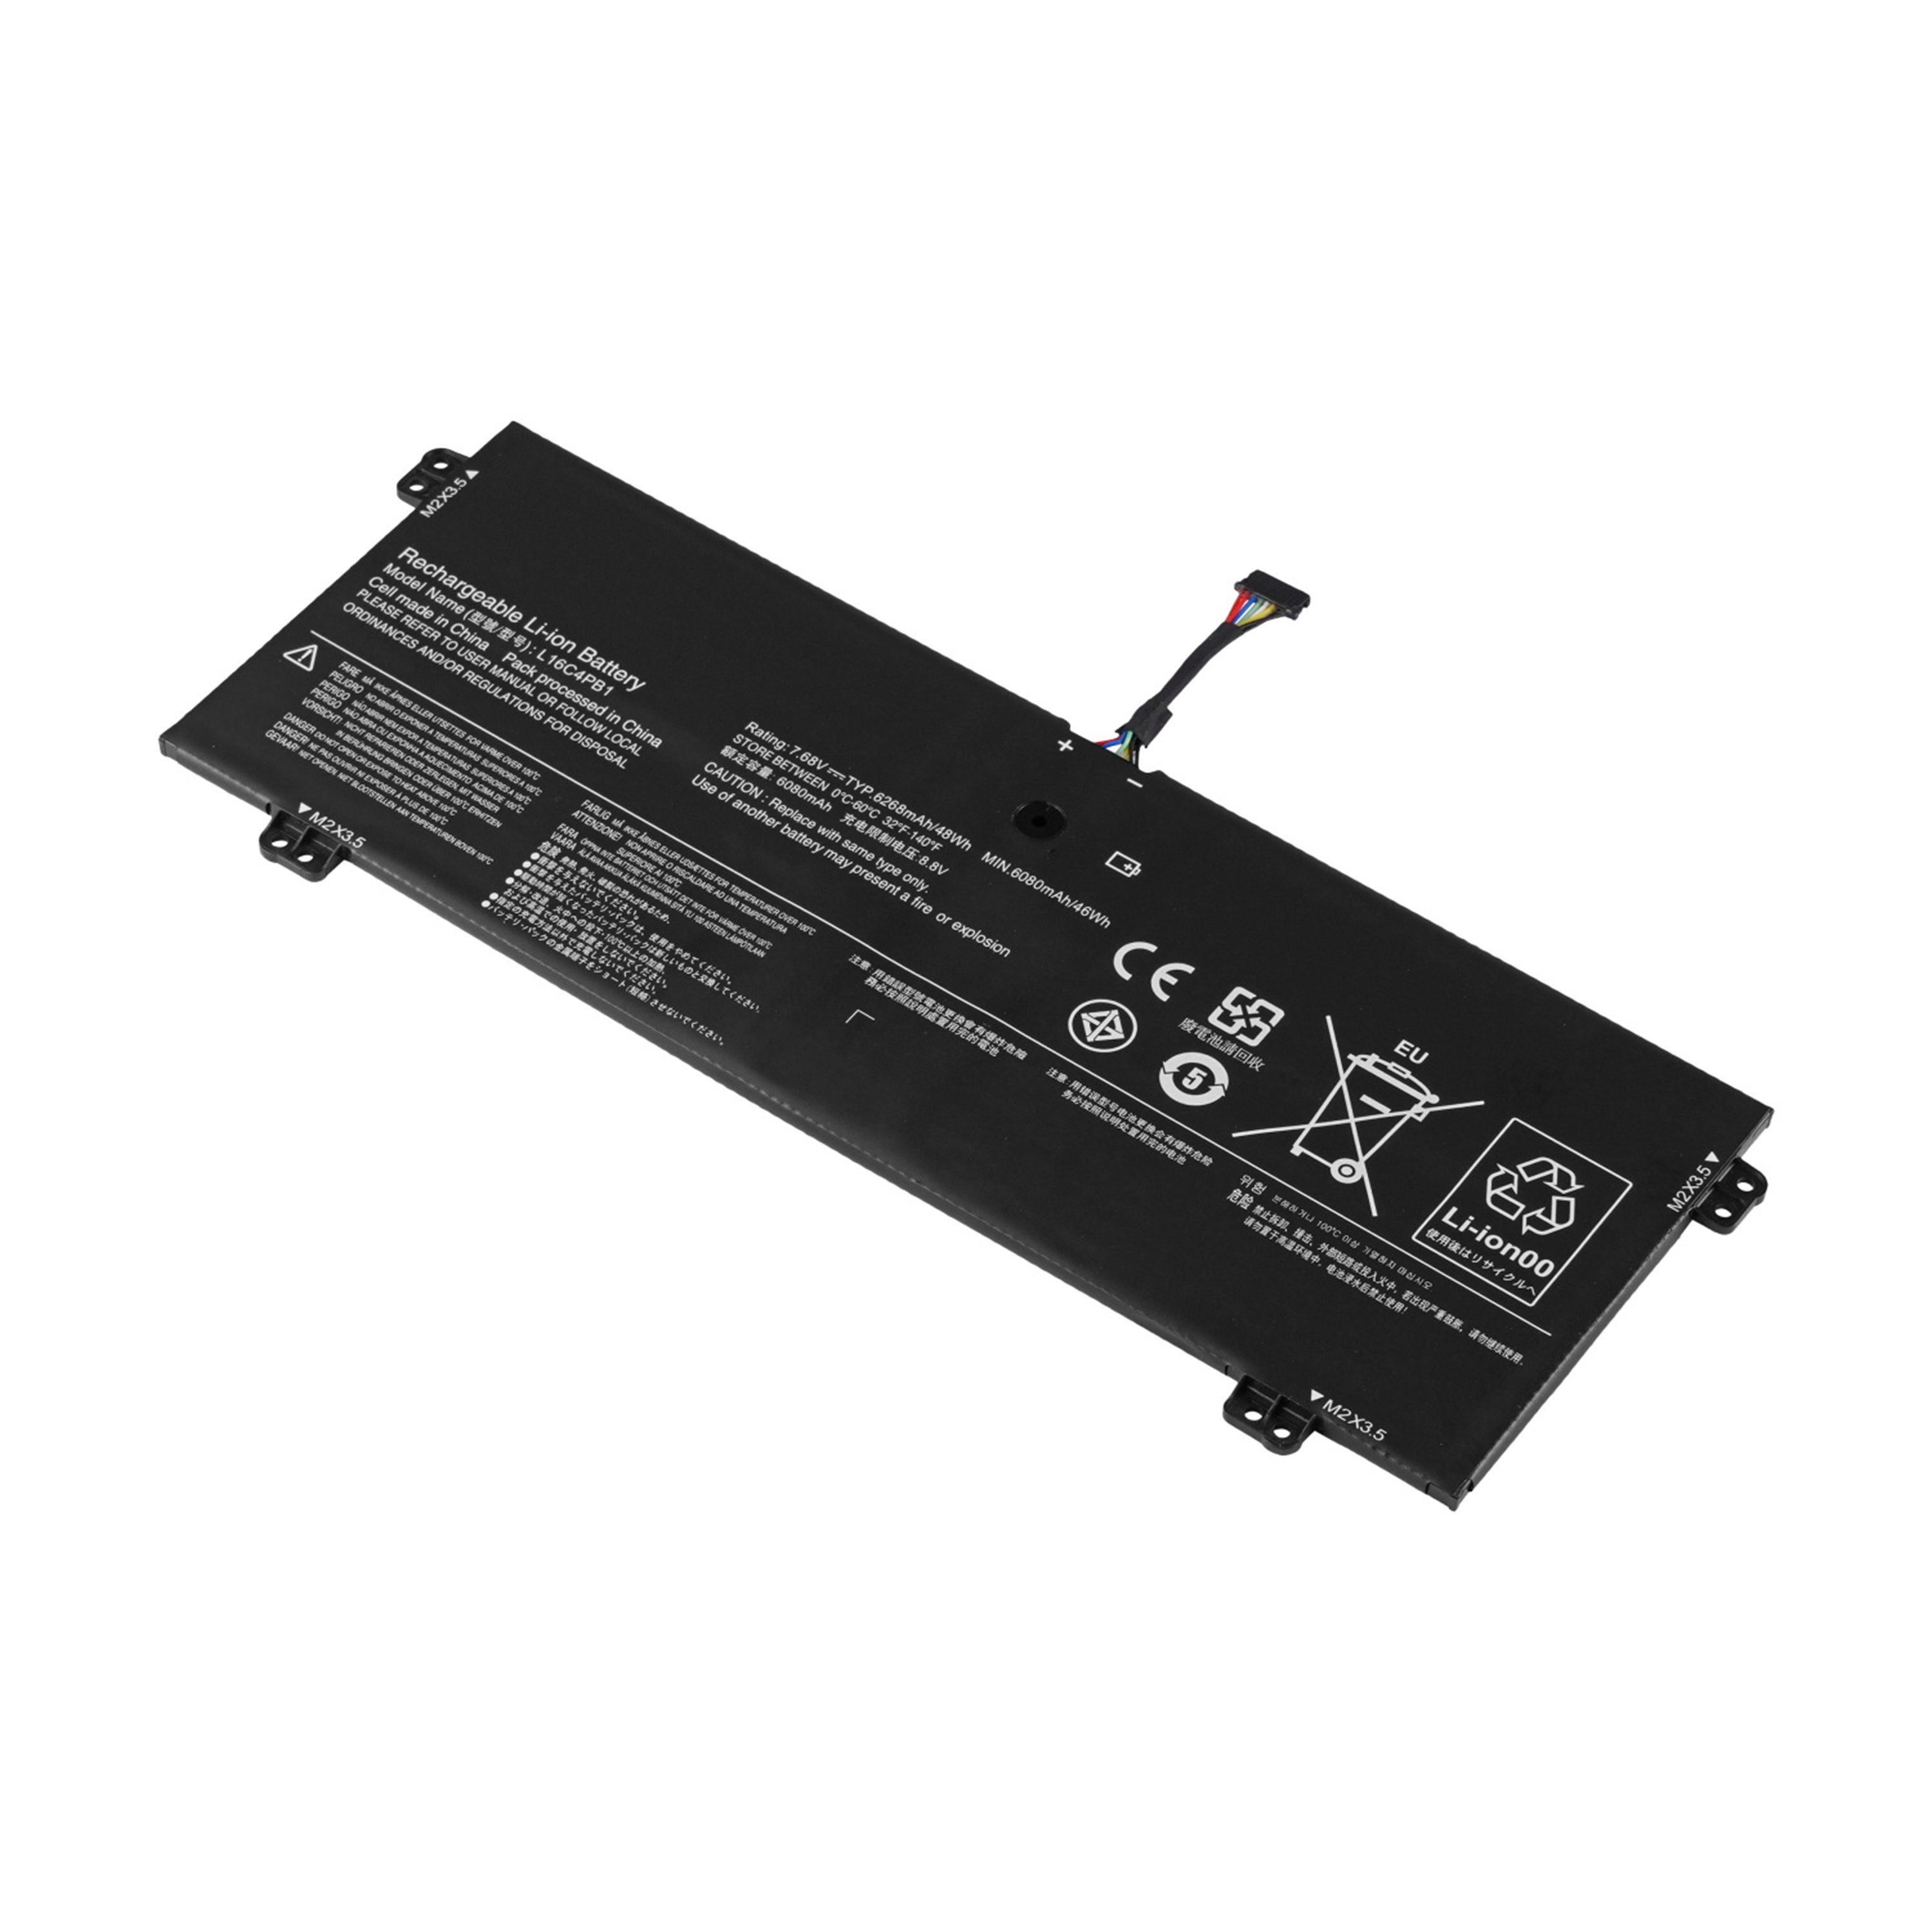 L16C4PB1 rechargeable lithium ion Notebook battery Laptop battery For Lenovo YOGA 720-13IKB 730-13IKB 730-13IWL Series 7.68V 48Wh 6268mAh 4cell